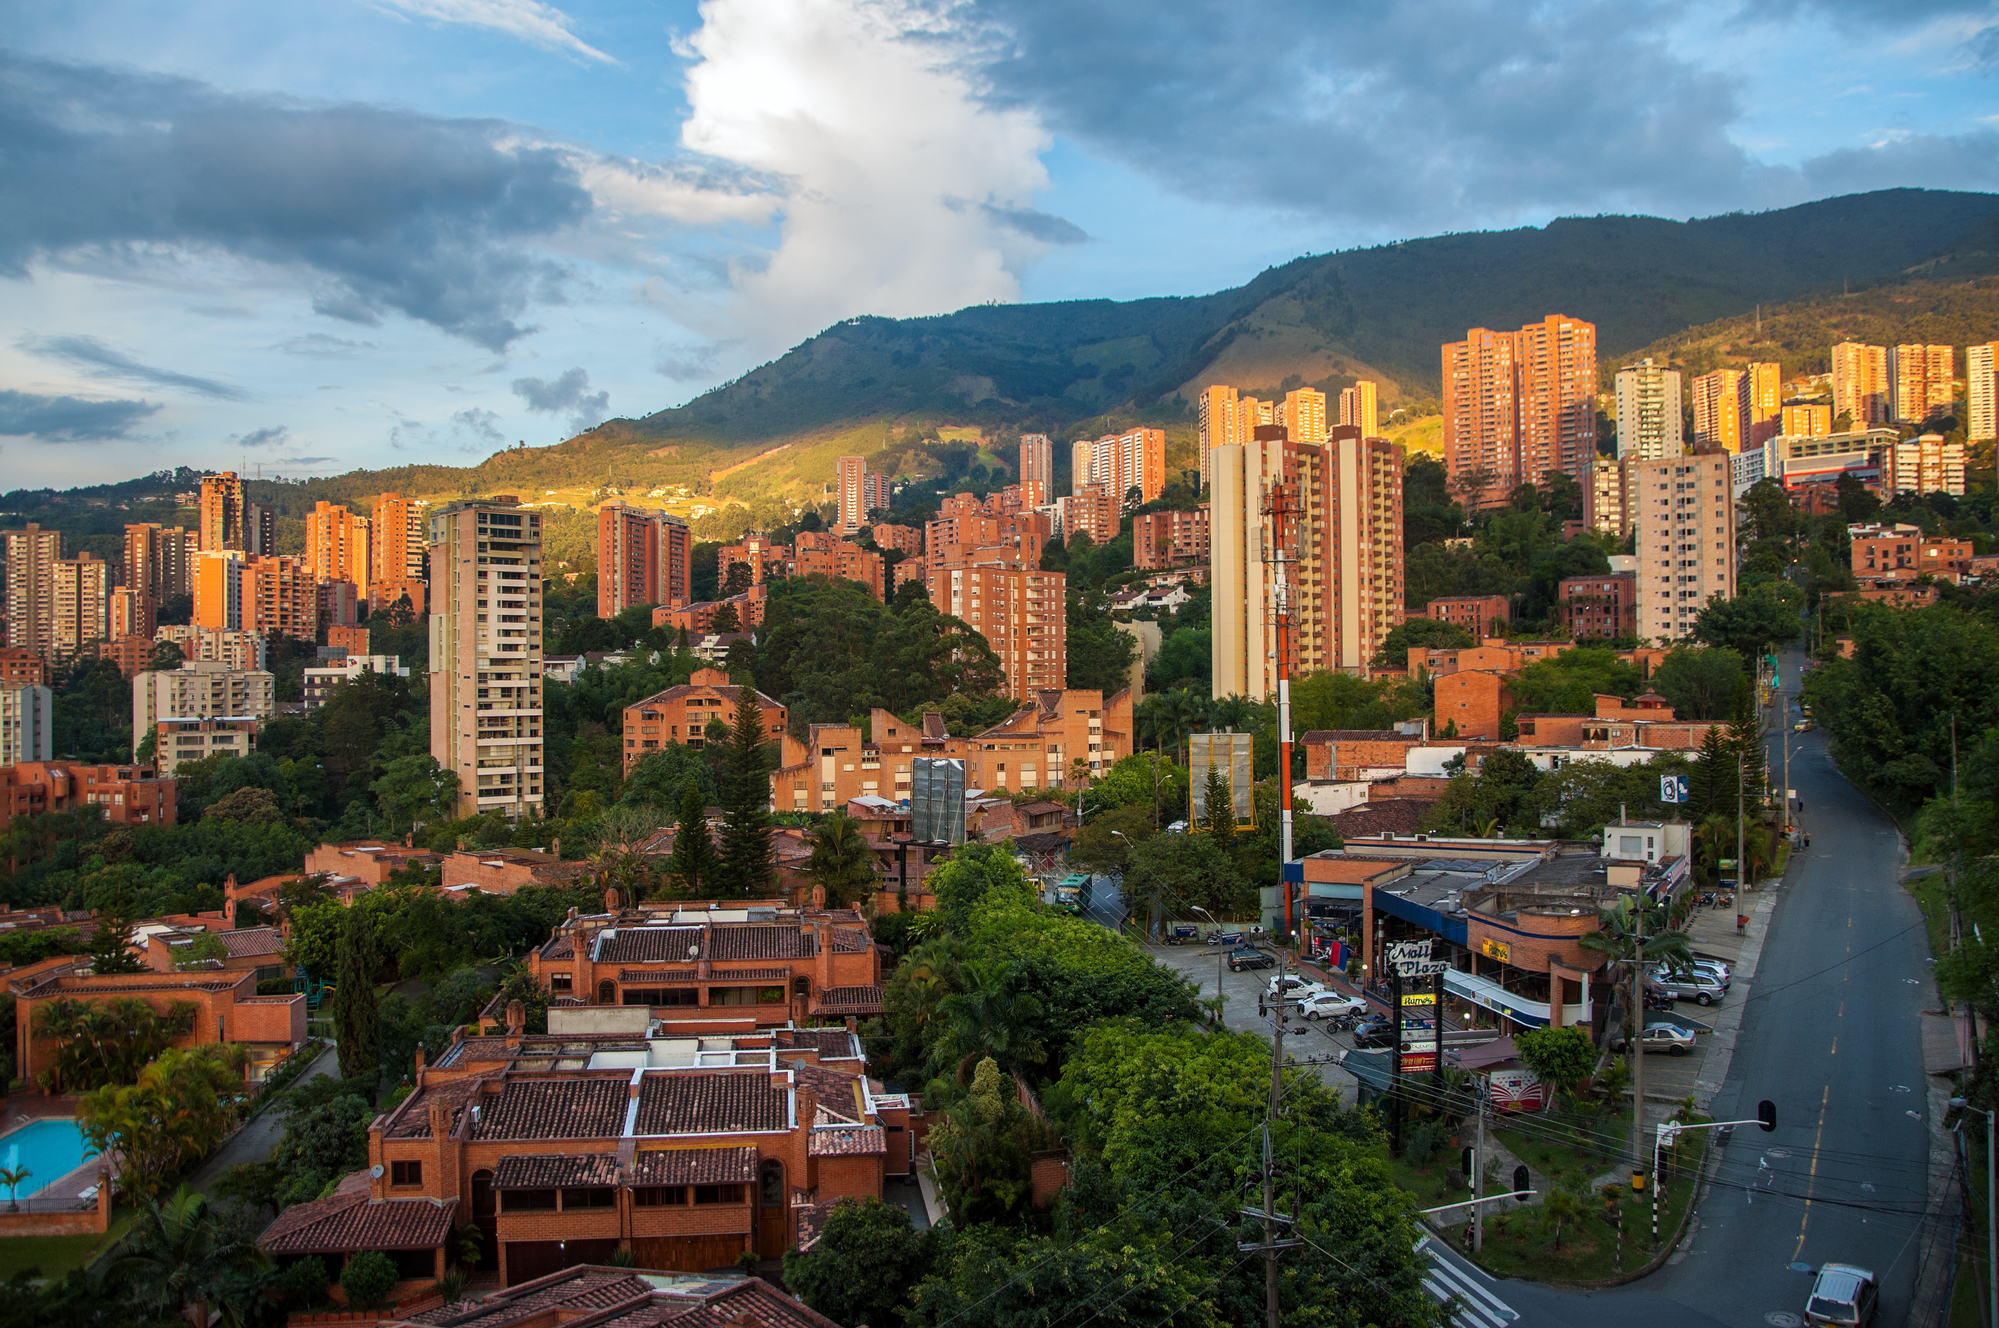 Plan a Bachelor Party in Medellin, Colombia (2021 Guide)